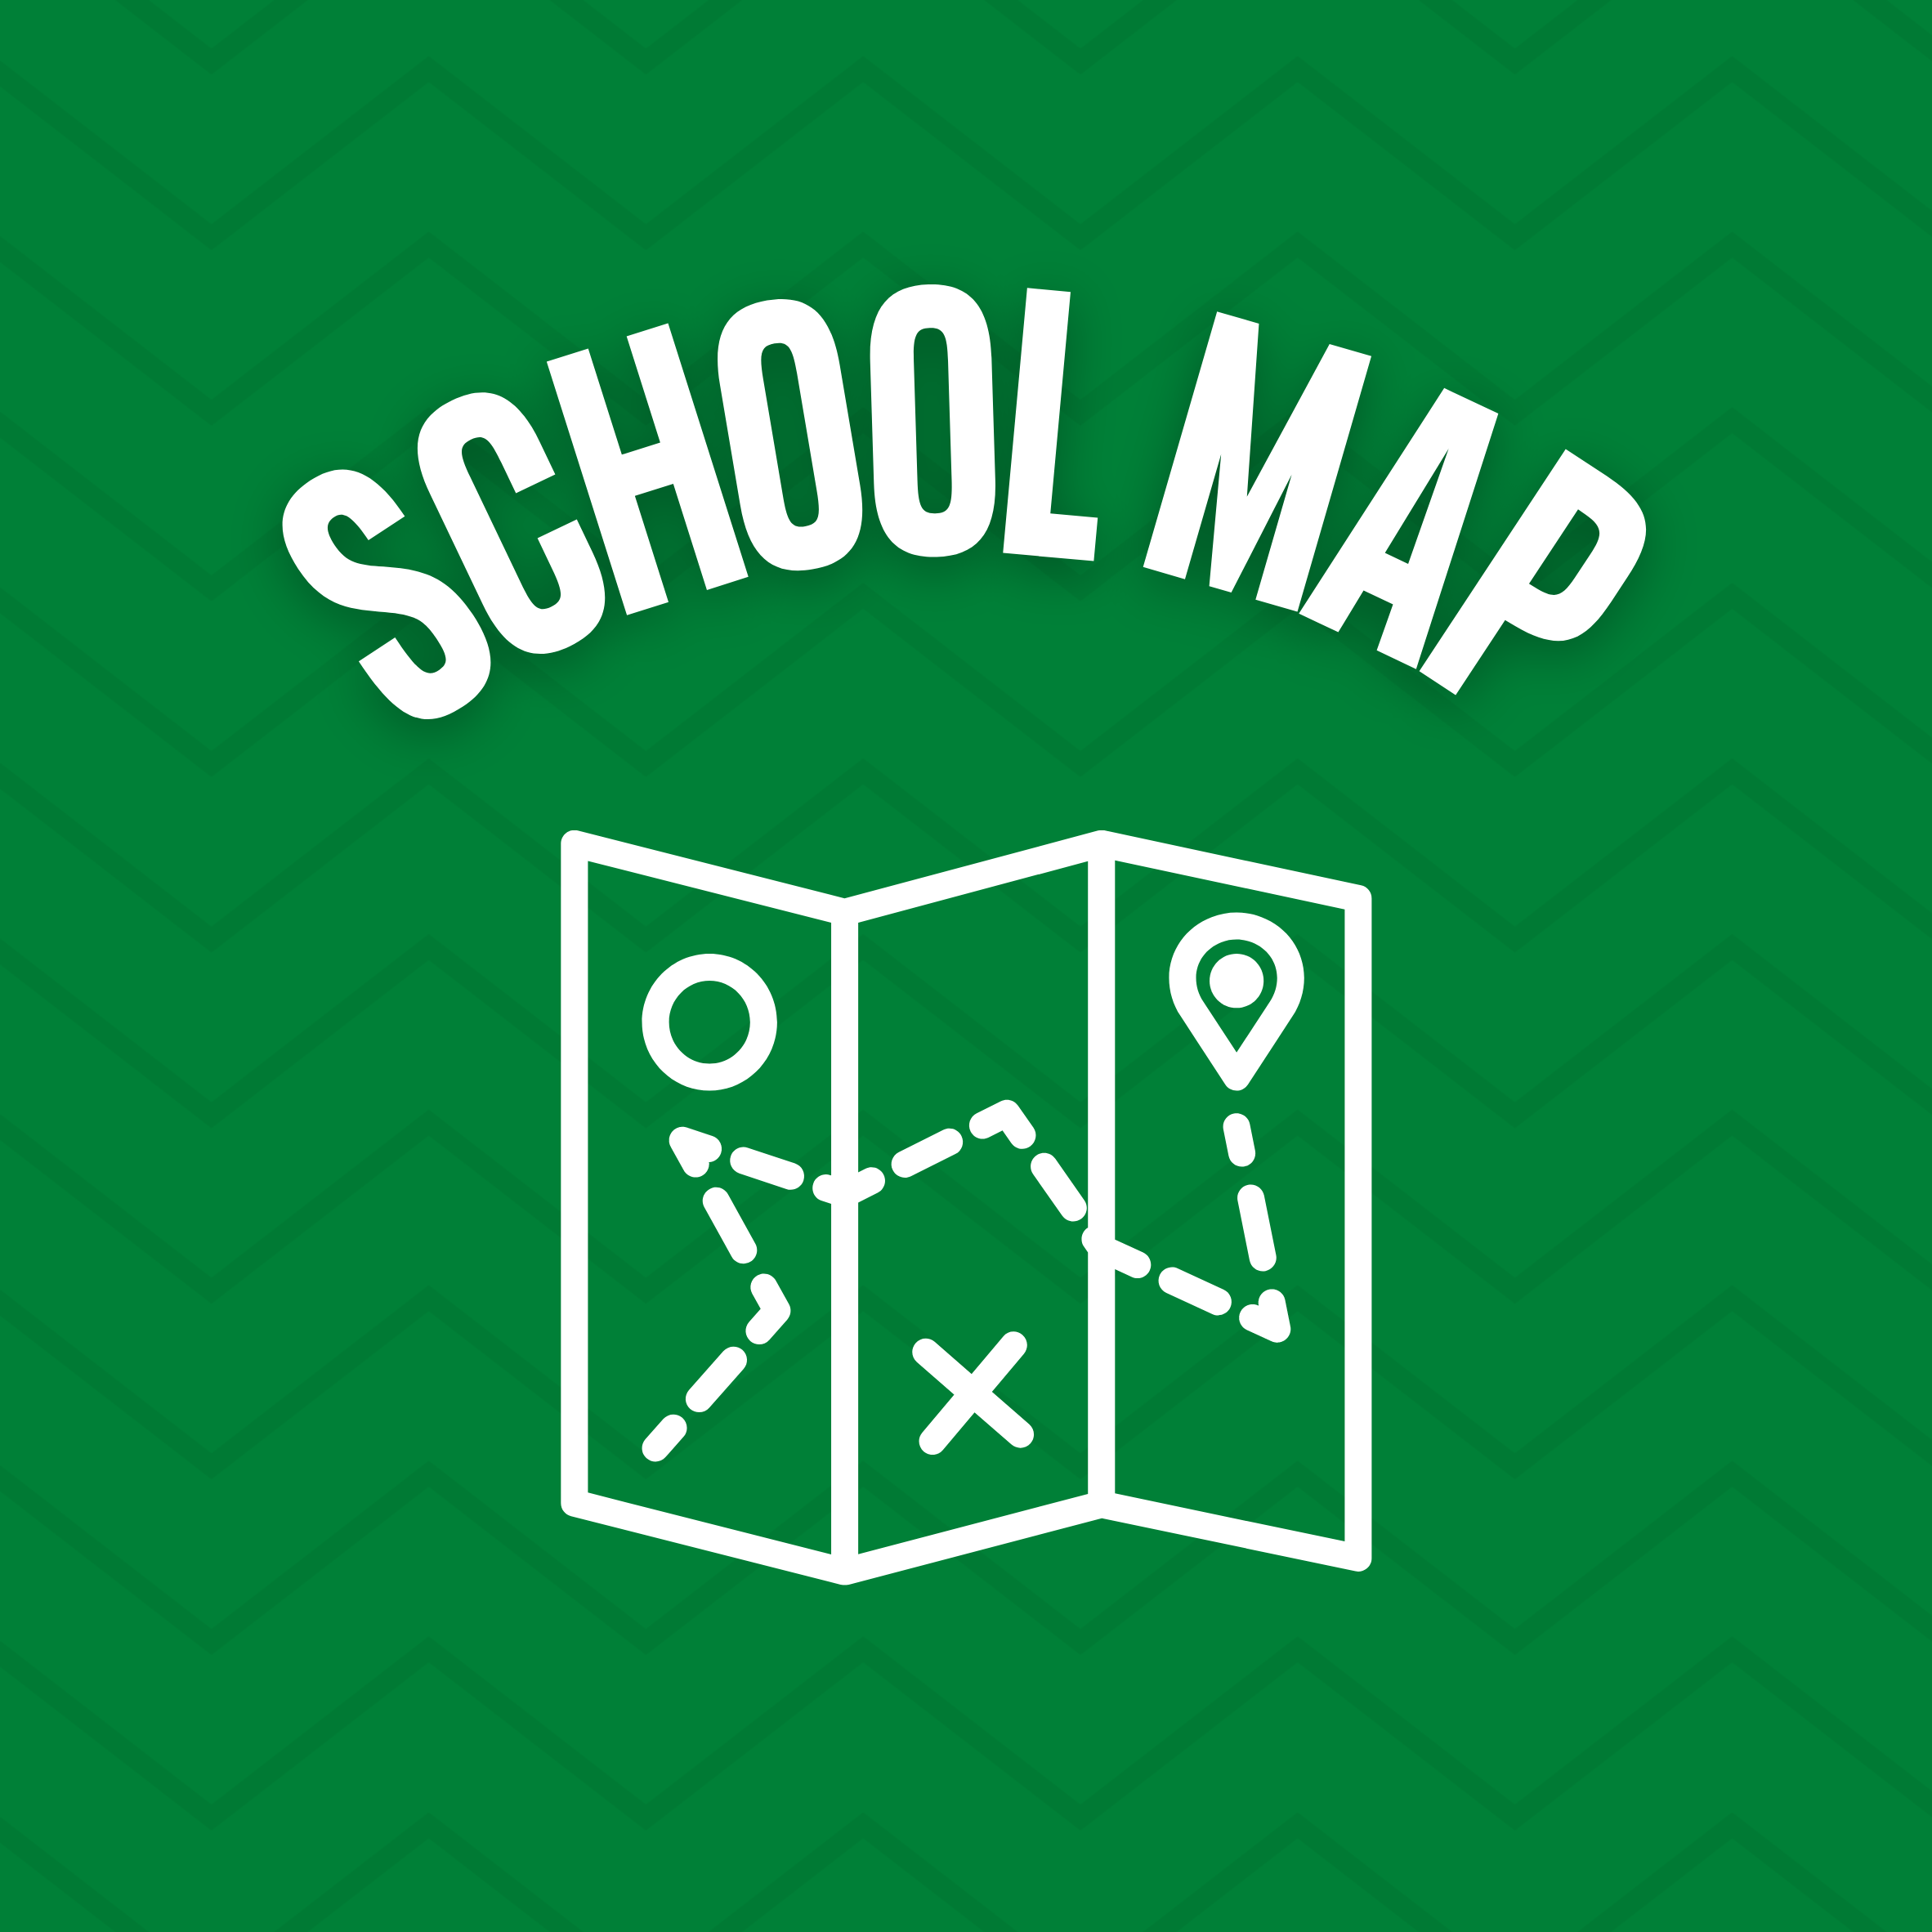 green box with word School Map